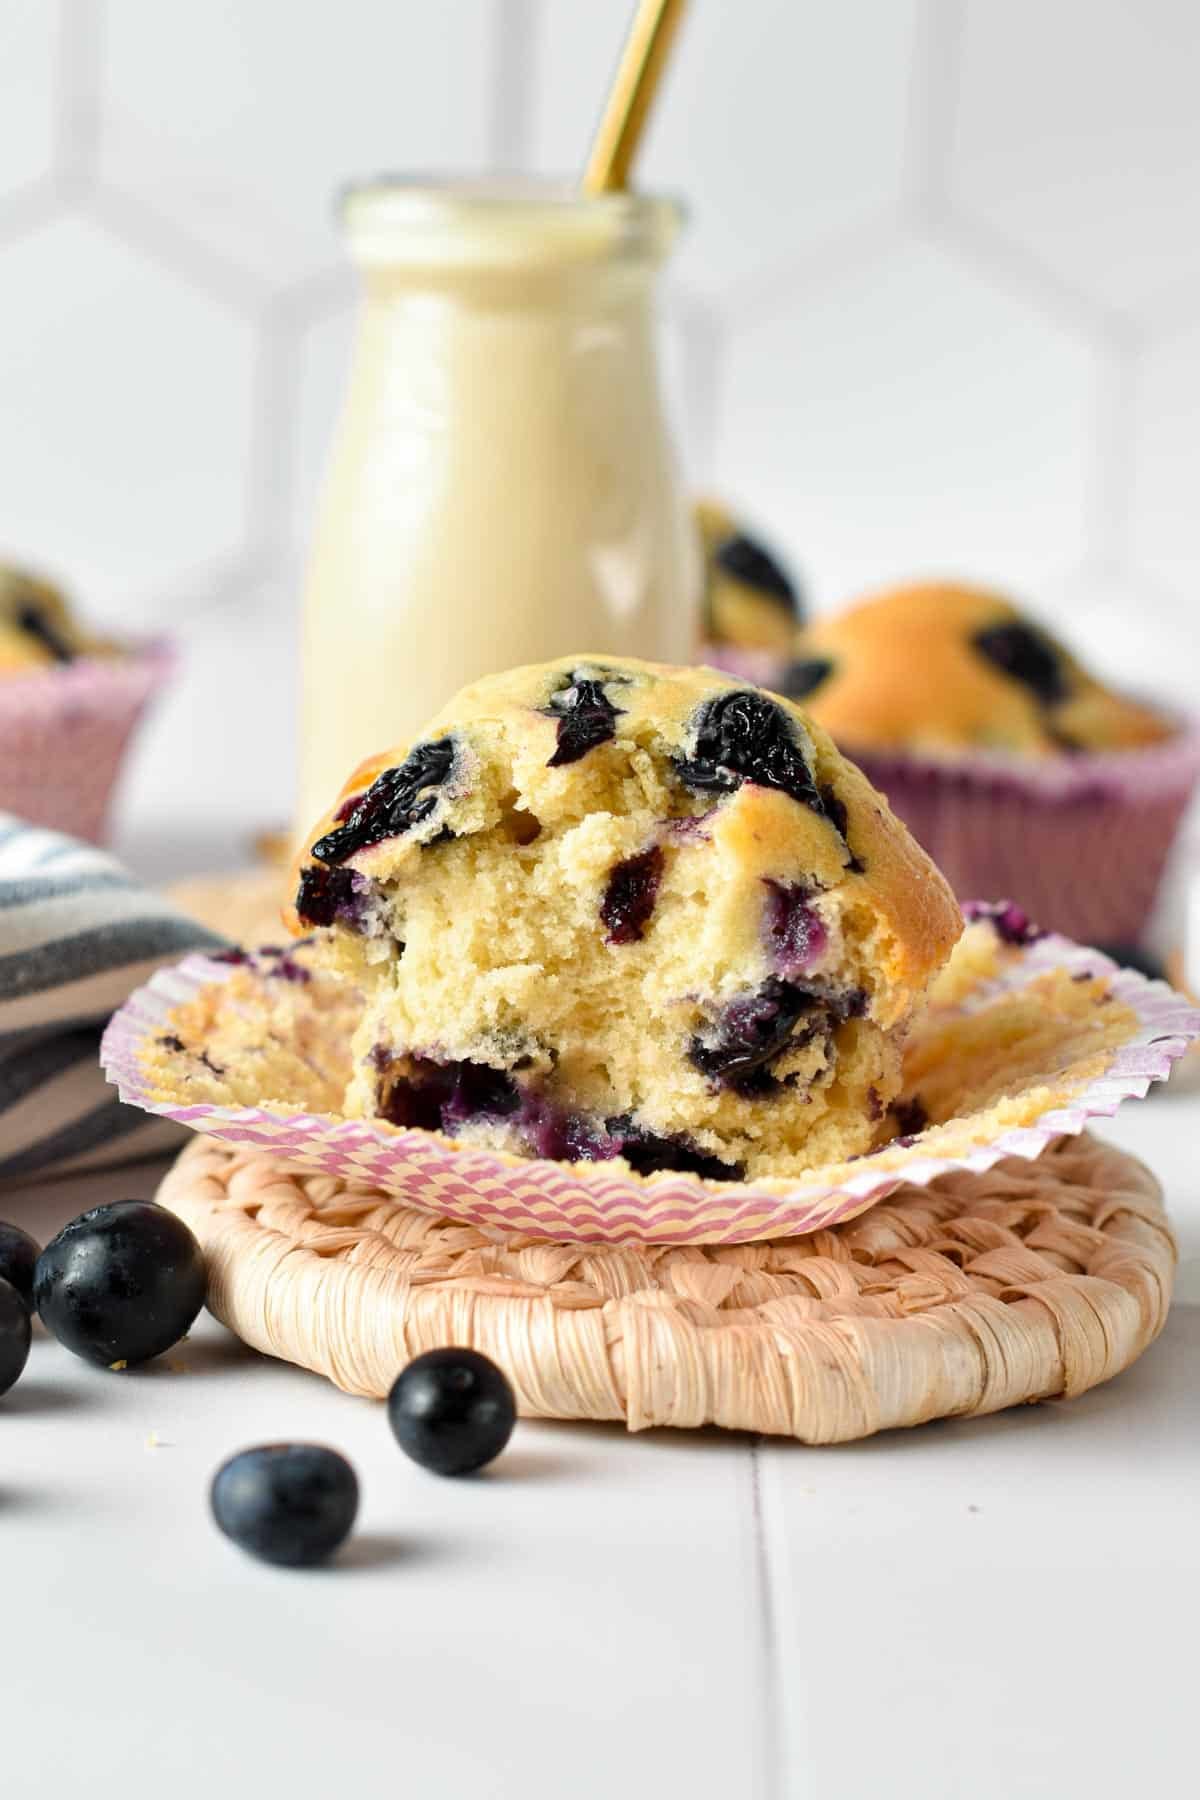 These Eggless Blueberry Muffins are easy, egg-free blueberry muffins with the most fluffy texture filled with Juicy blueberries.These Eggless Blueberry Muffins are easy, egg-free blueberry muffins with the most fluffy texture filled with Juicy blueberries.